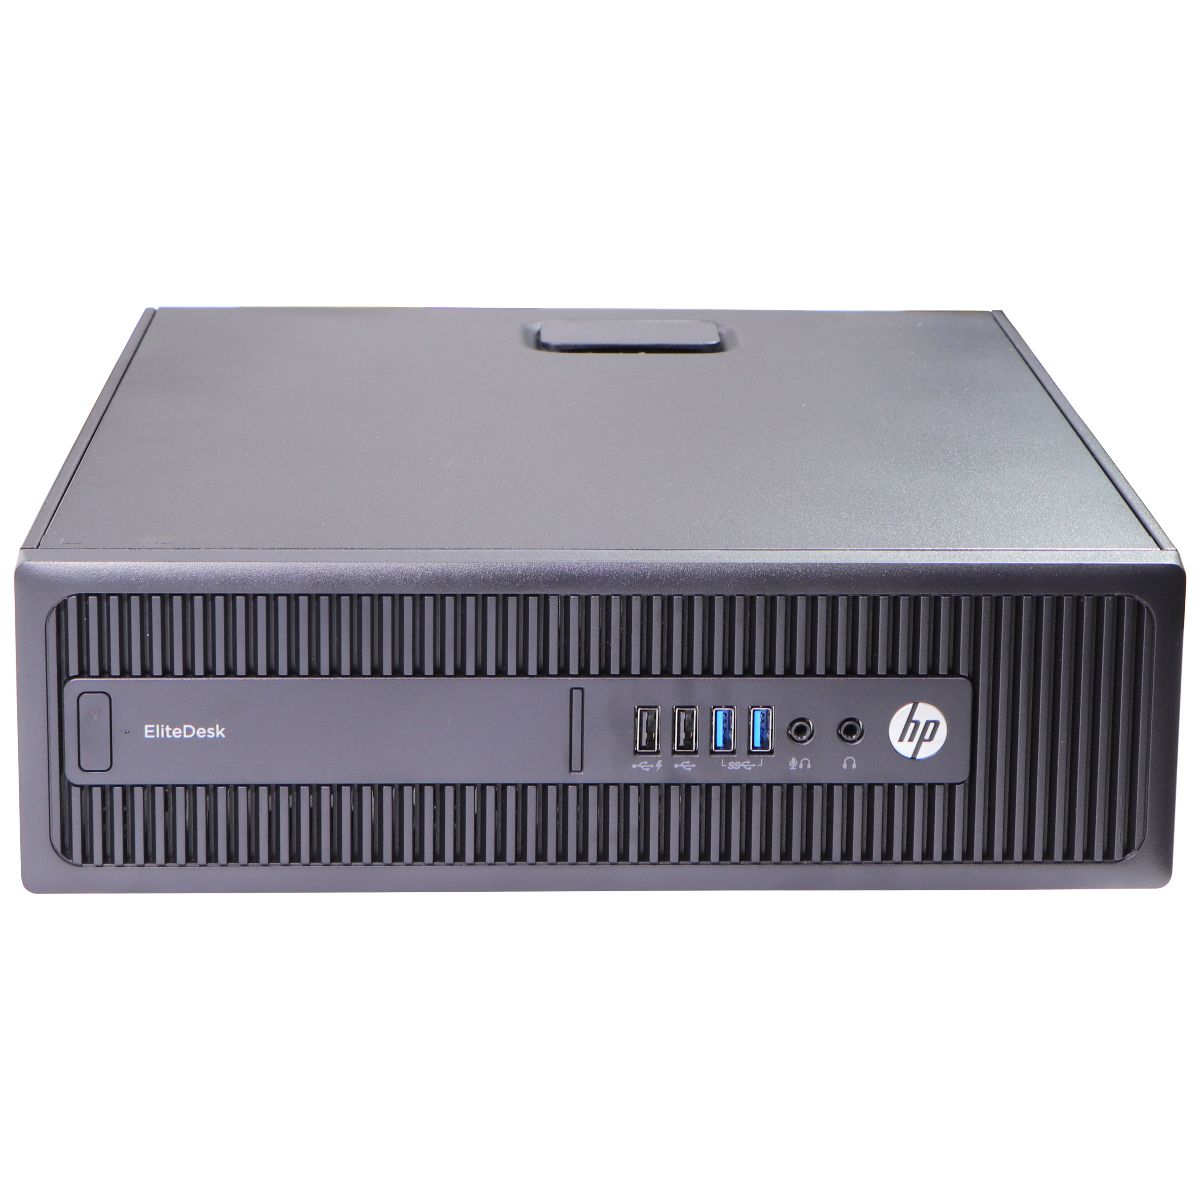 HP EliteDesk 705 G3 SFF (W4Q25AV) AMD PRO A10-9700/256GB/8GB/10 Pro PC Desktops & All-In-Ones HP    - Simple Cell Bulk Wholesale Pricing - USA Seller